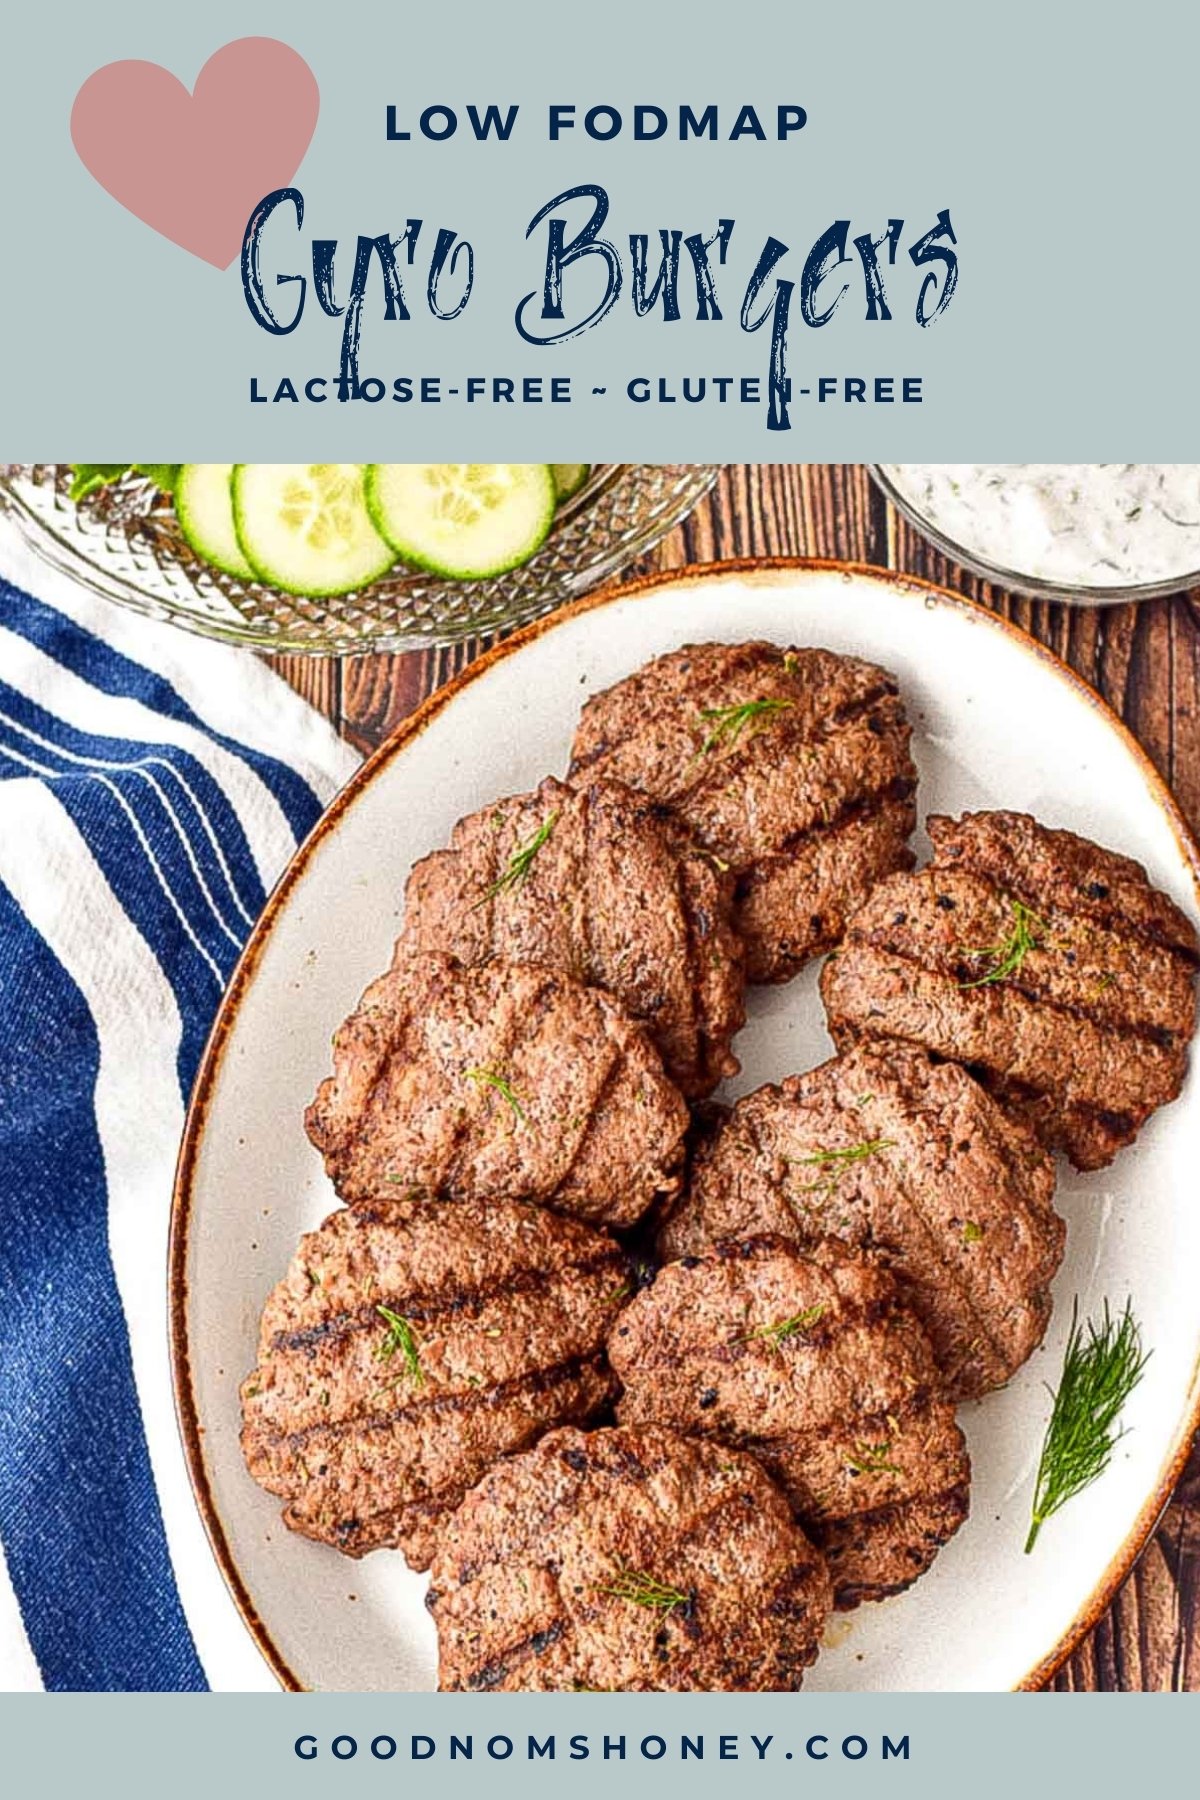 pinterest image with low fodmap gyro burgers lactose-free gluten-free at the top and goodnomshoney.com at the bottom